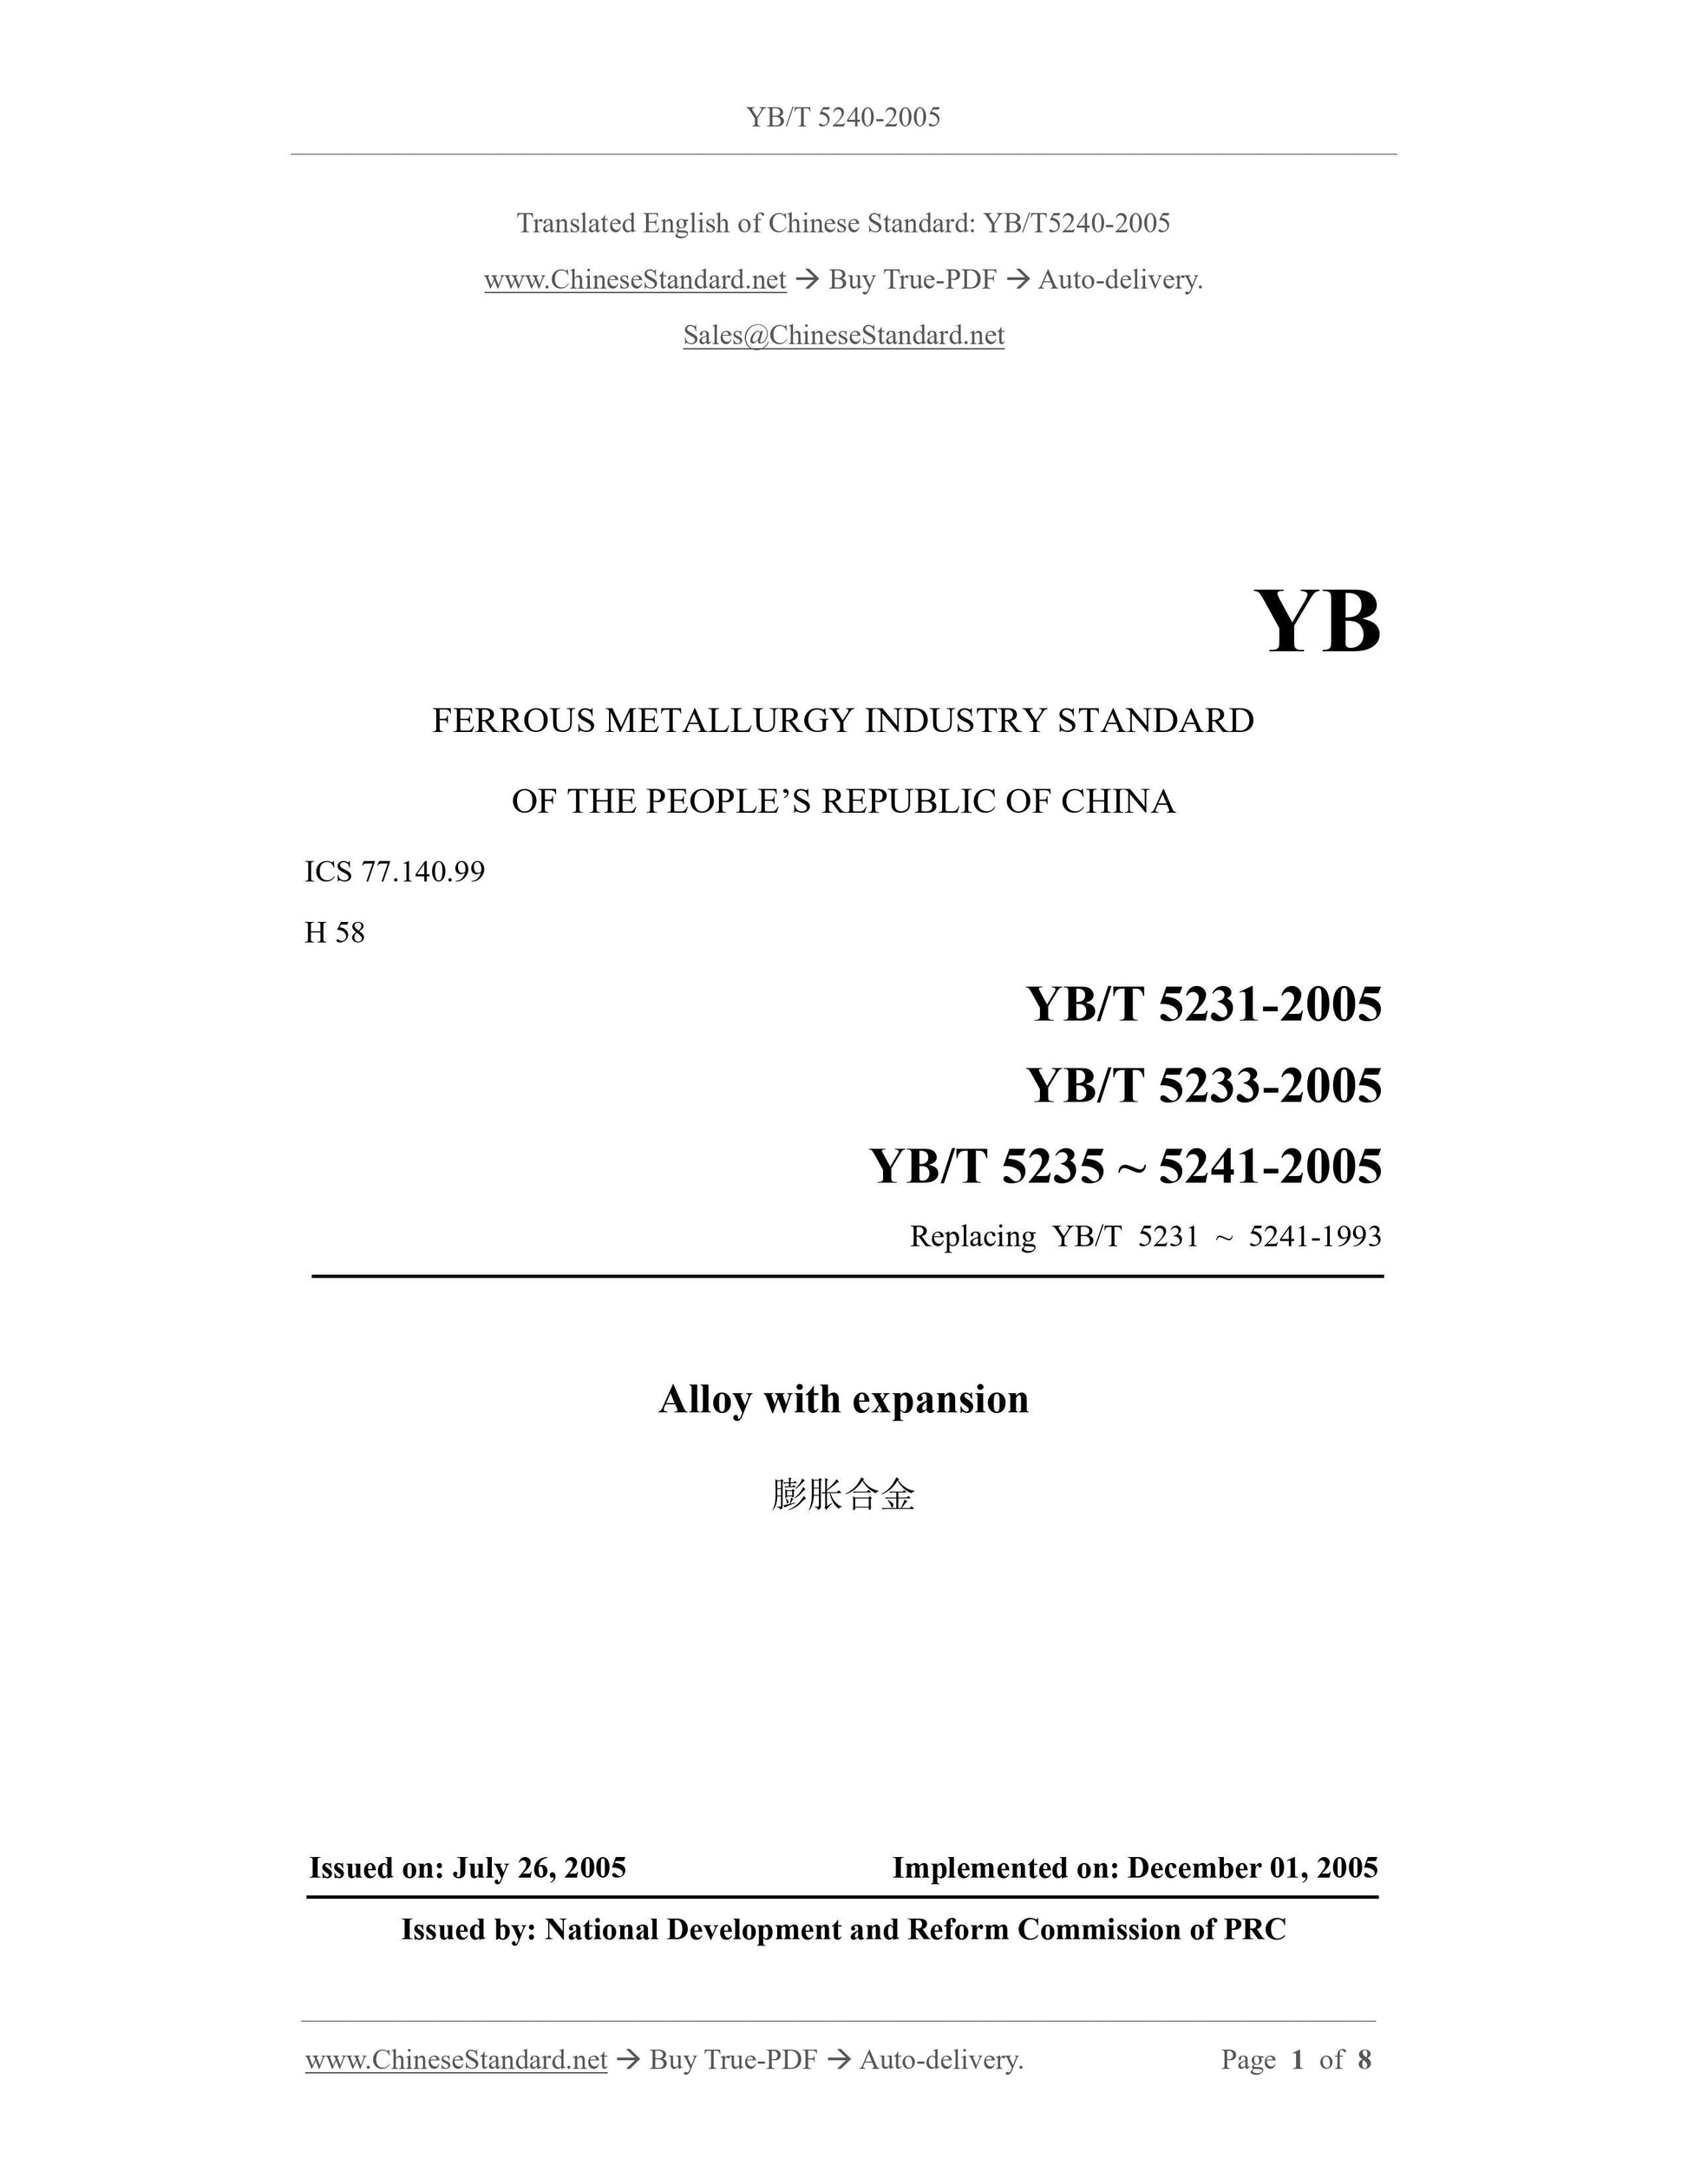 YB/T 5240-2005 Page 1